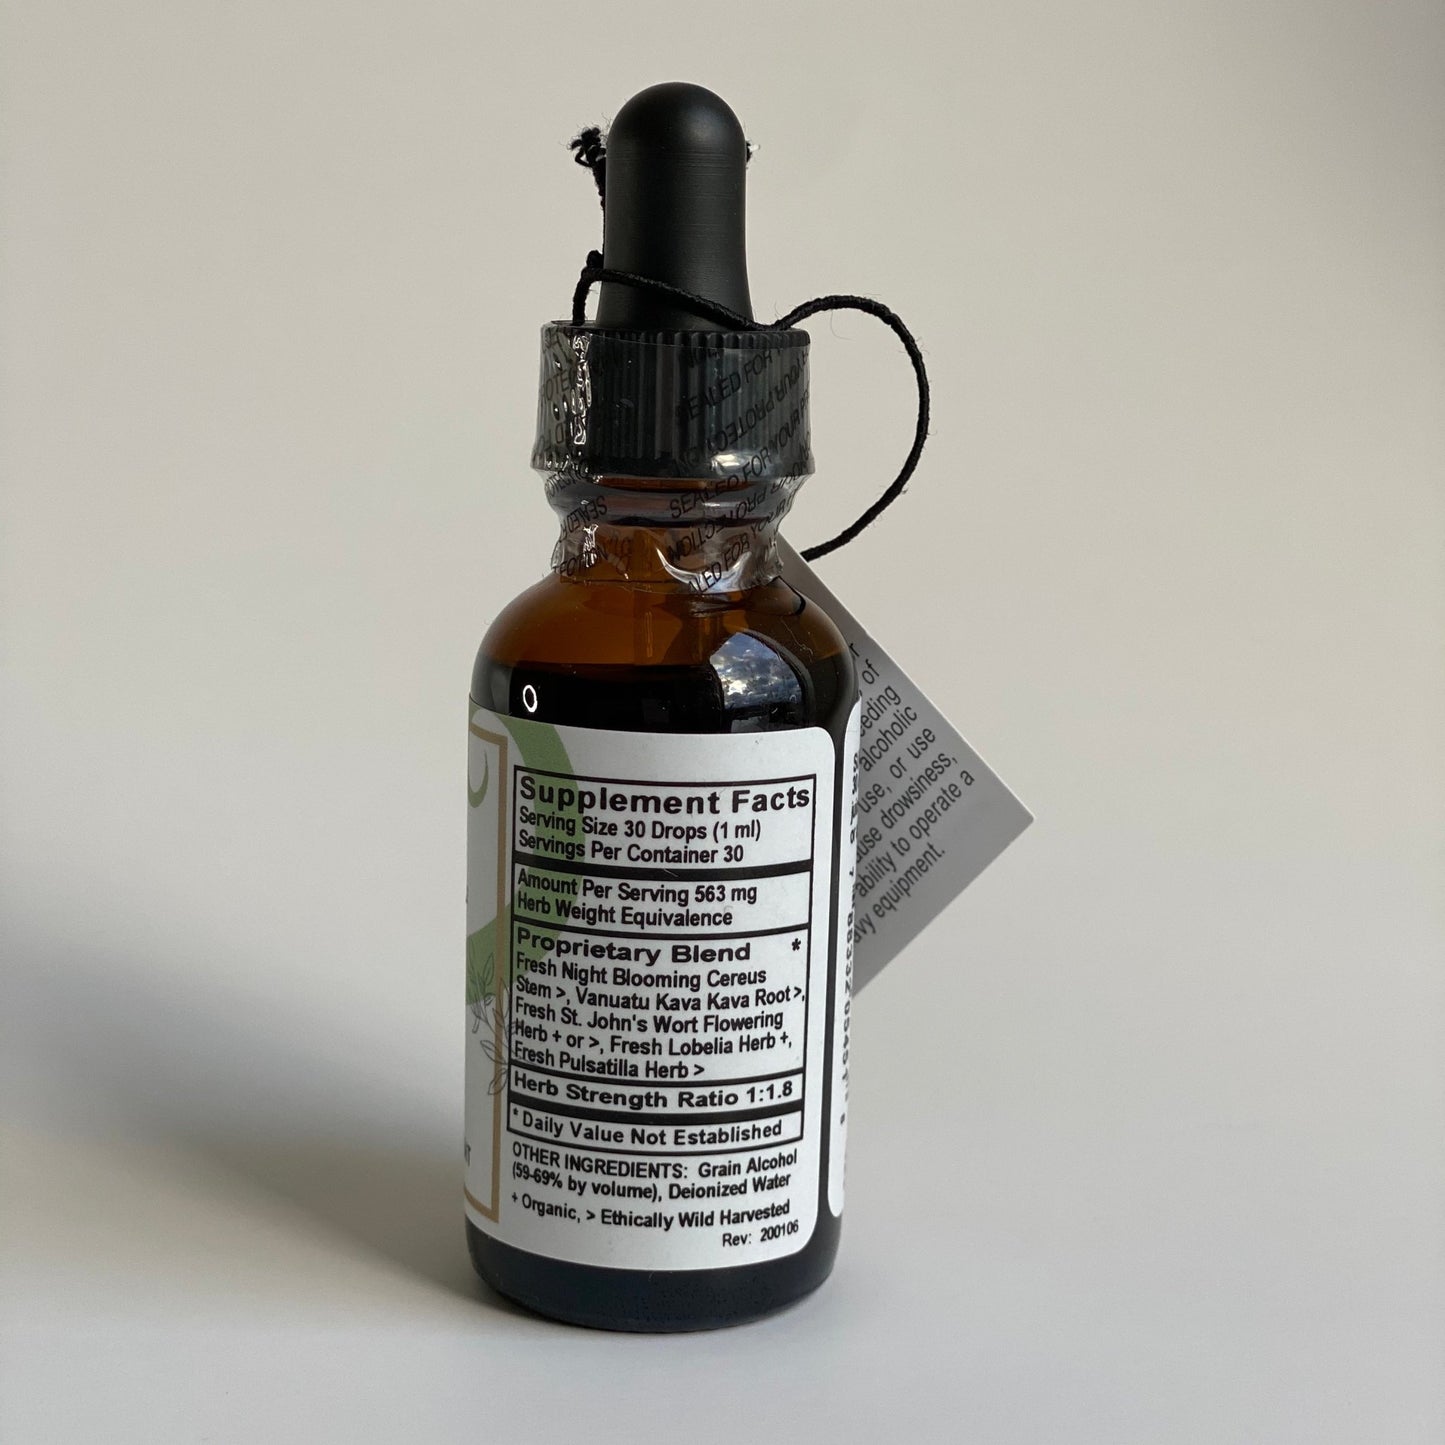 ANXIET-EASE liquid drops - House Of Wellness by MCC